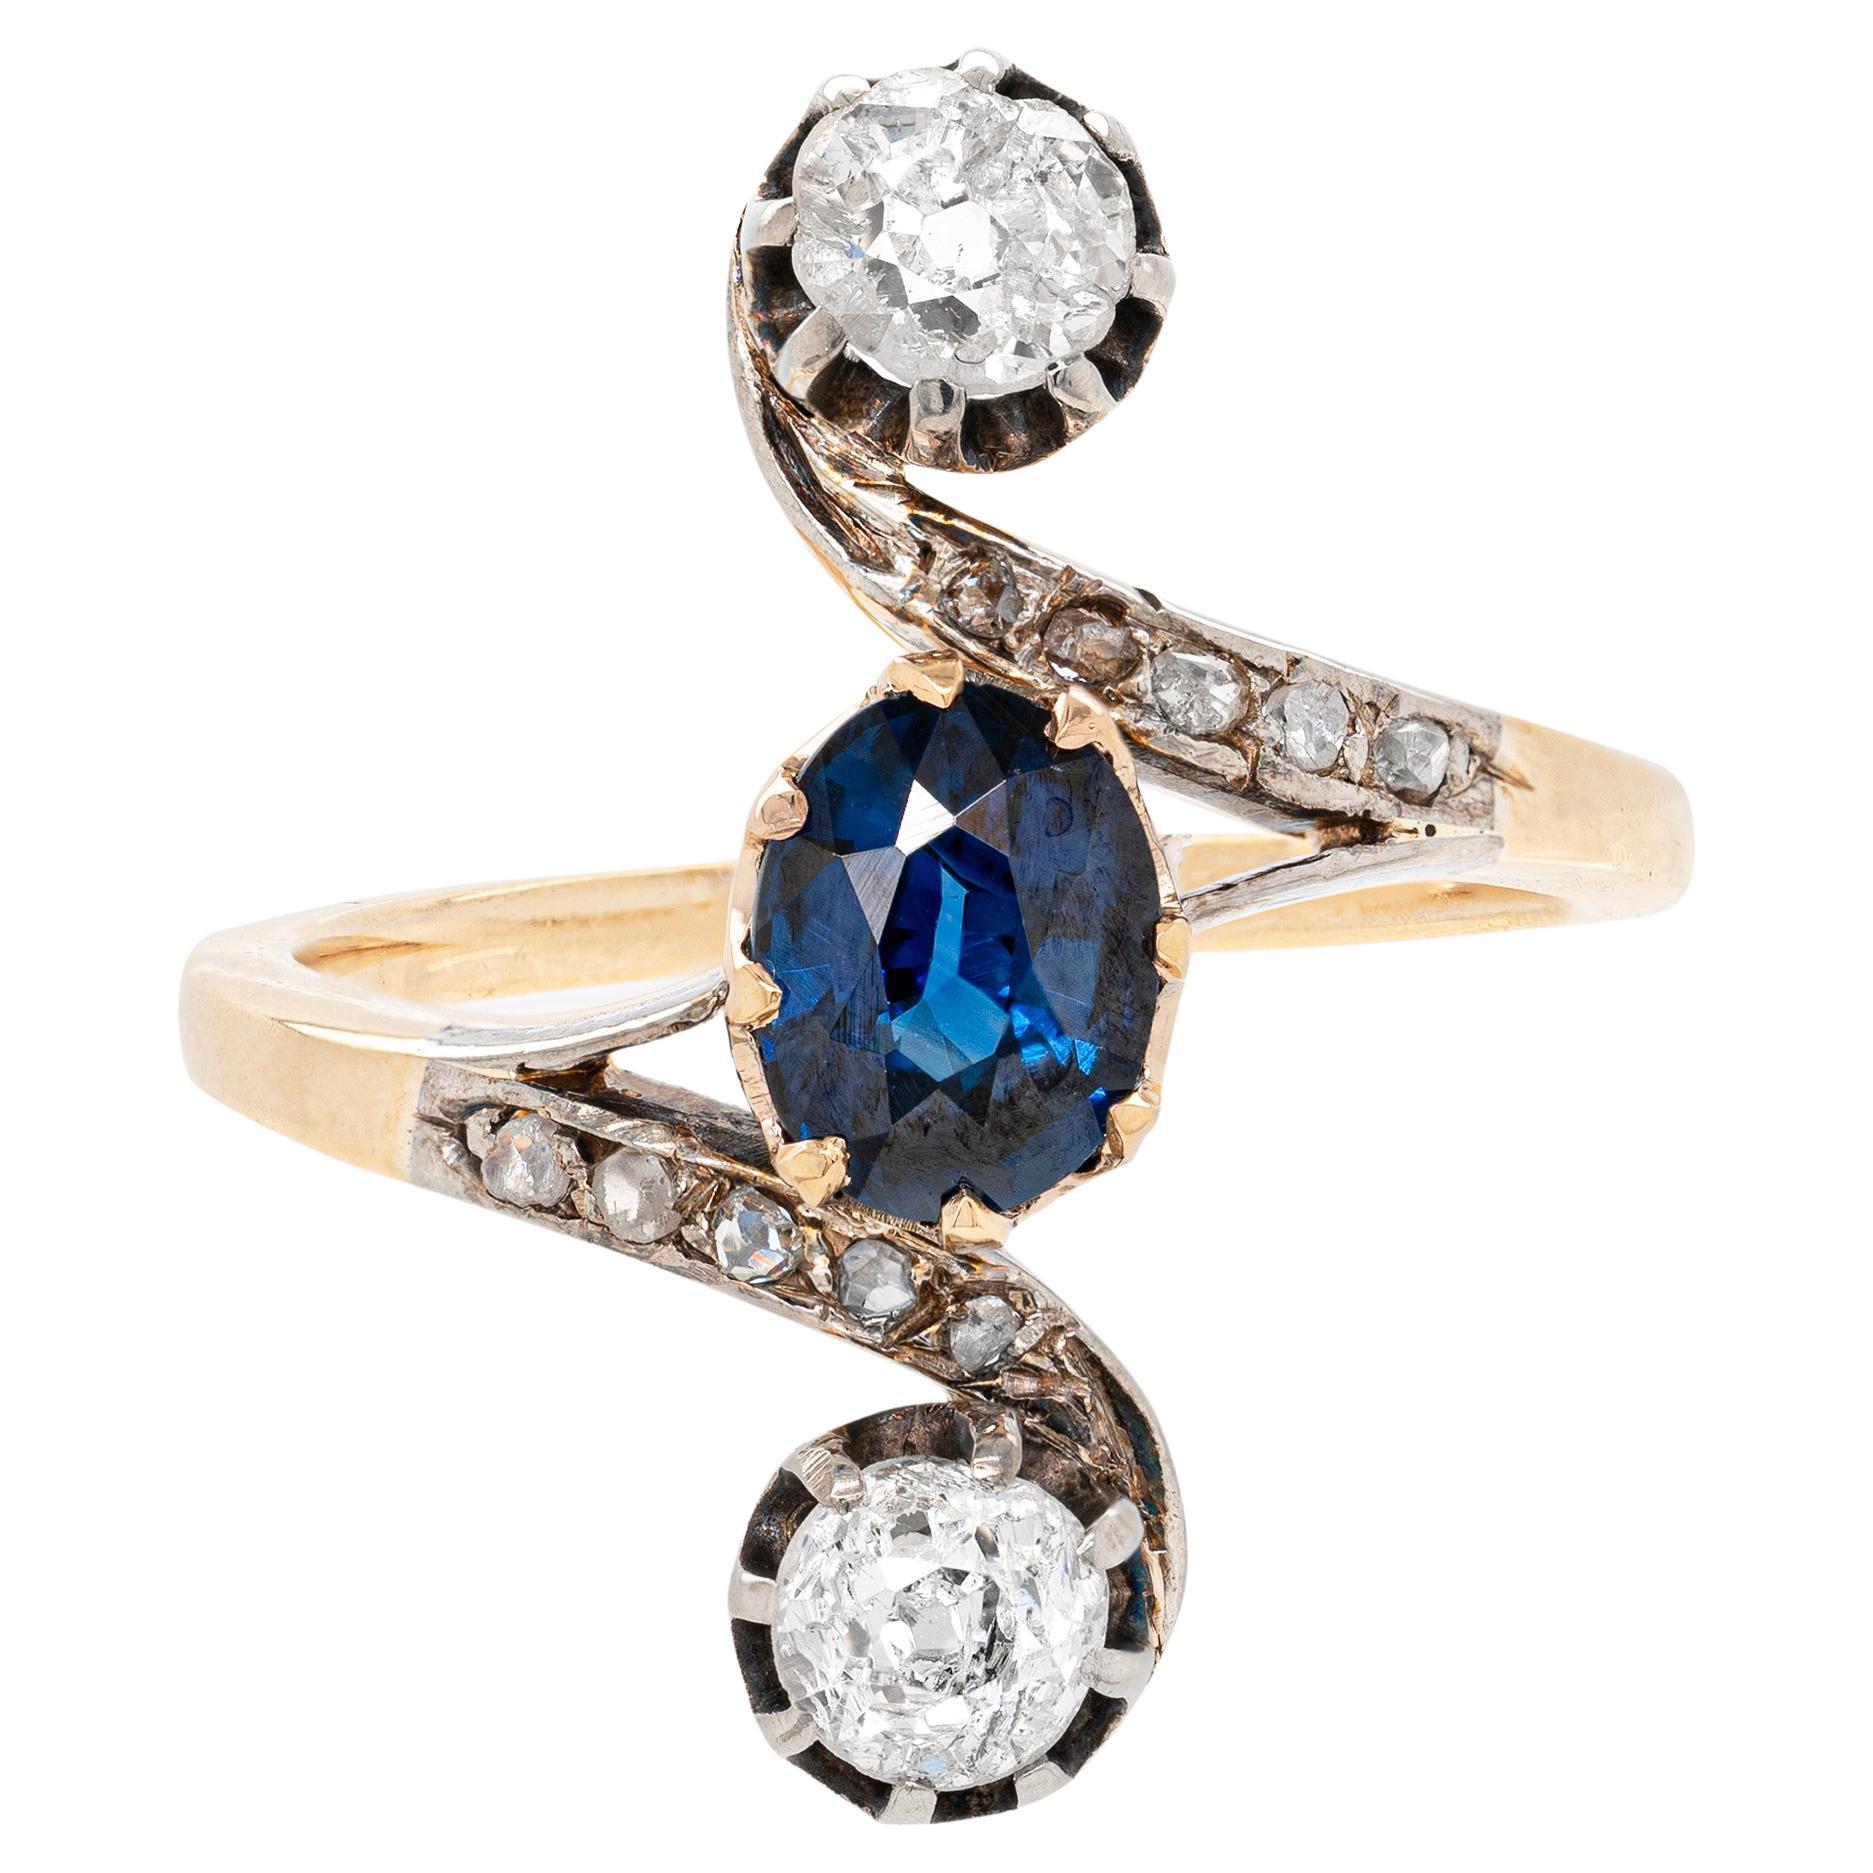 1.04 Carat Oval Sapphire and Old Mine Cut Diamond Three-Stone Ring, circa 1890 For Sale